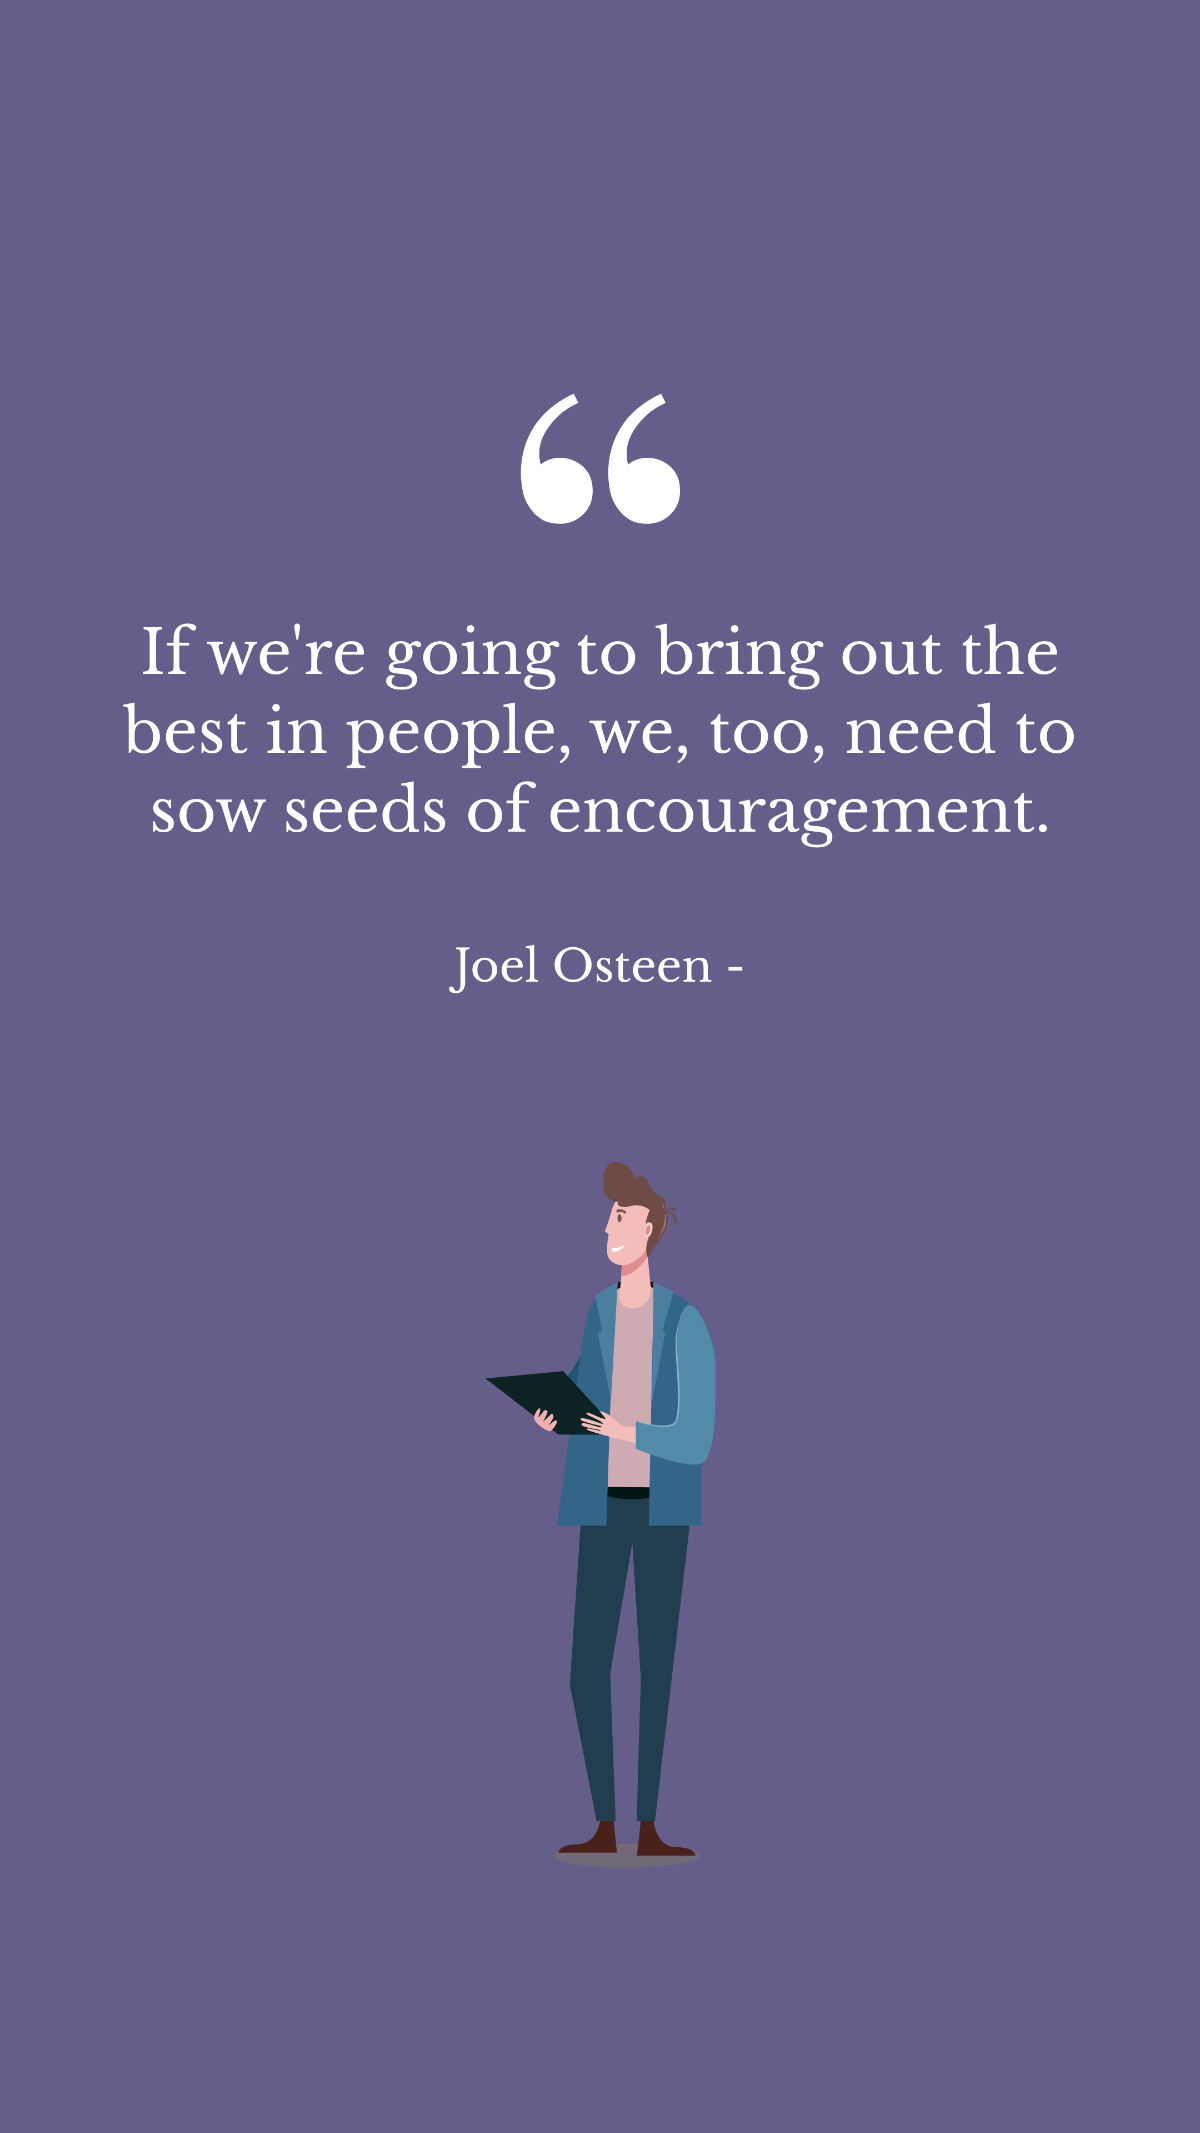 Joel Osteen - If we're going to bring out the best in people, we, too, need to sow seeds of encouragement. Template